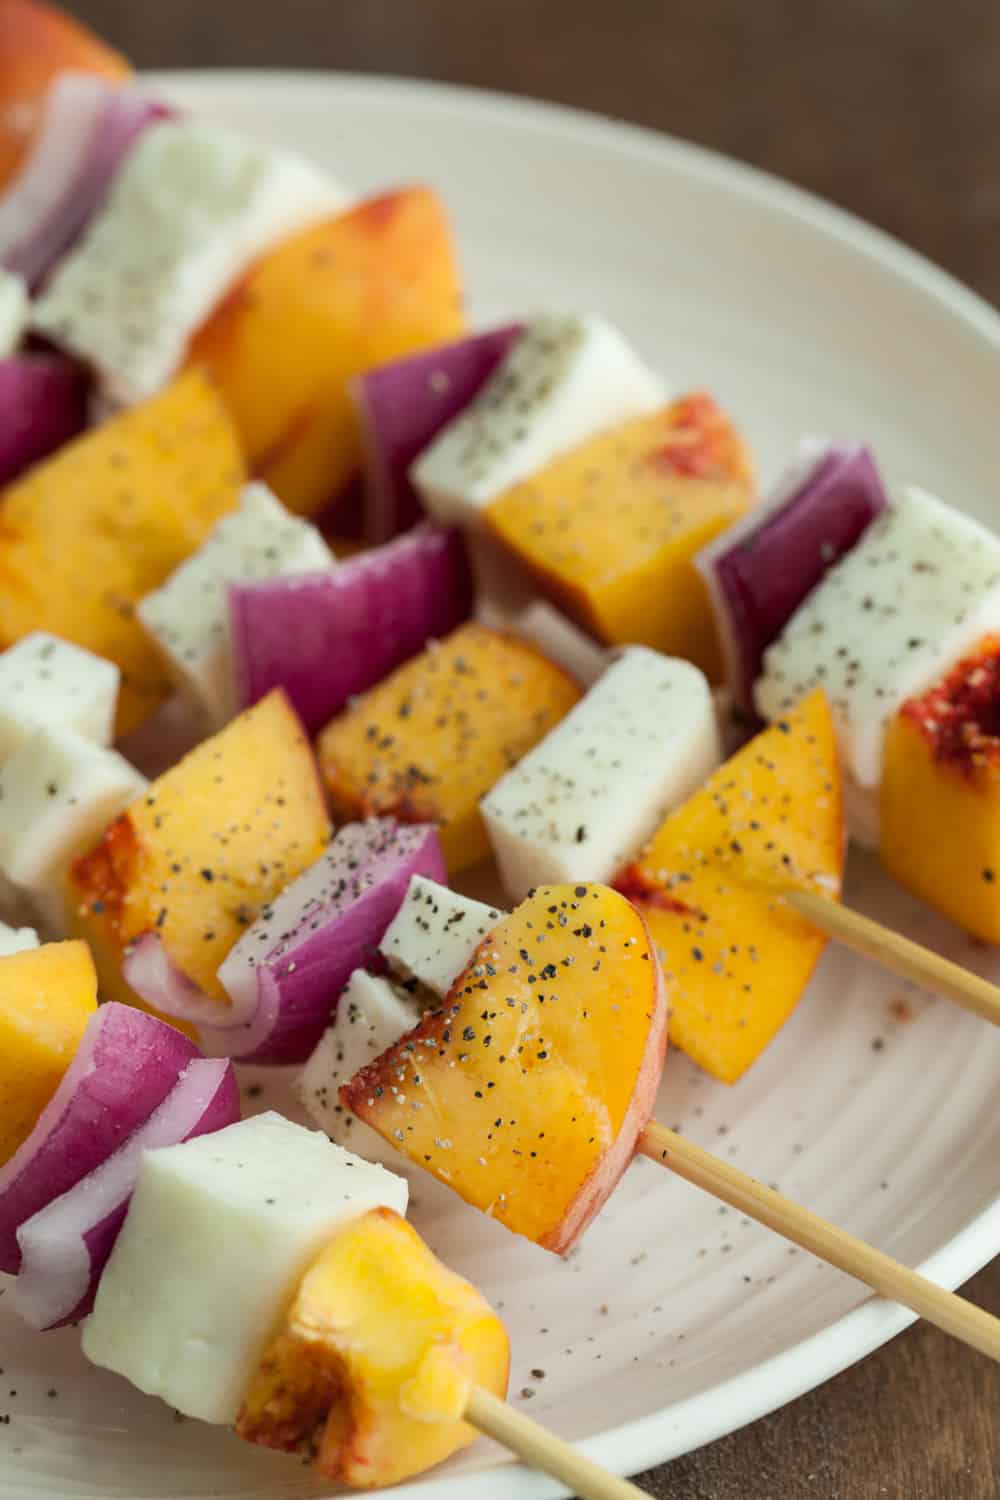 Grilled Peach and Halloumi Skewers with Basil-Jalapeno Sauce